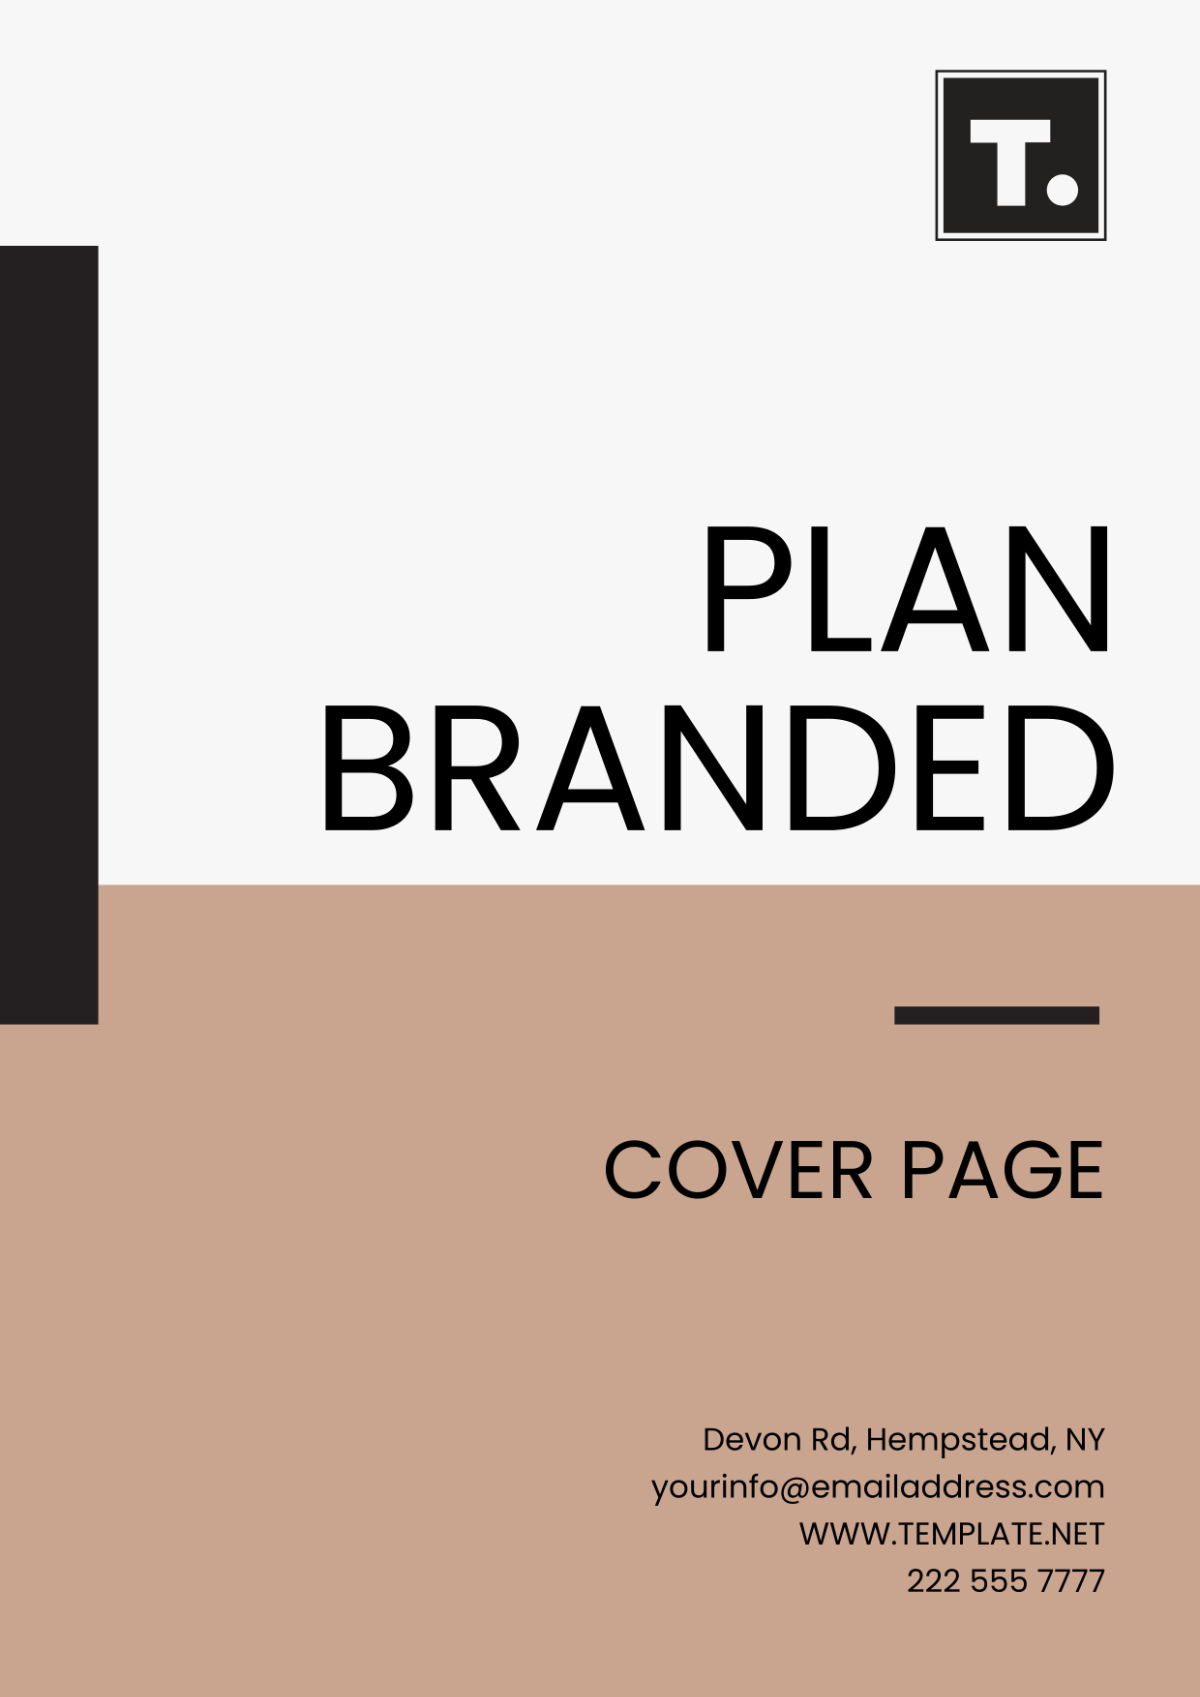 Plan Branded Cover Page